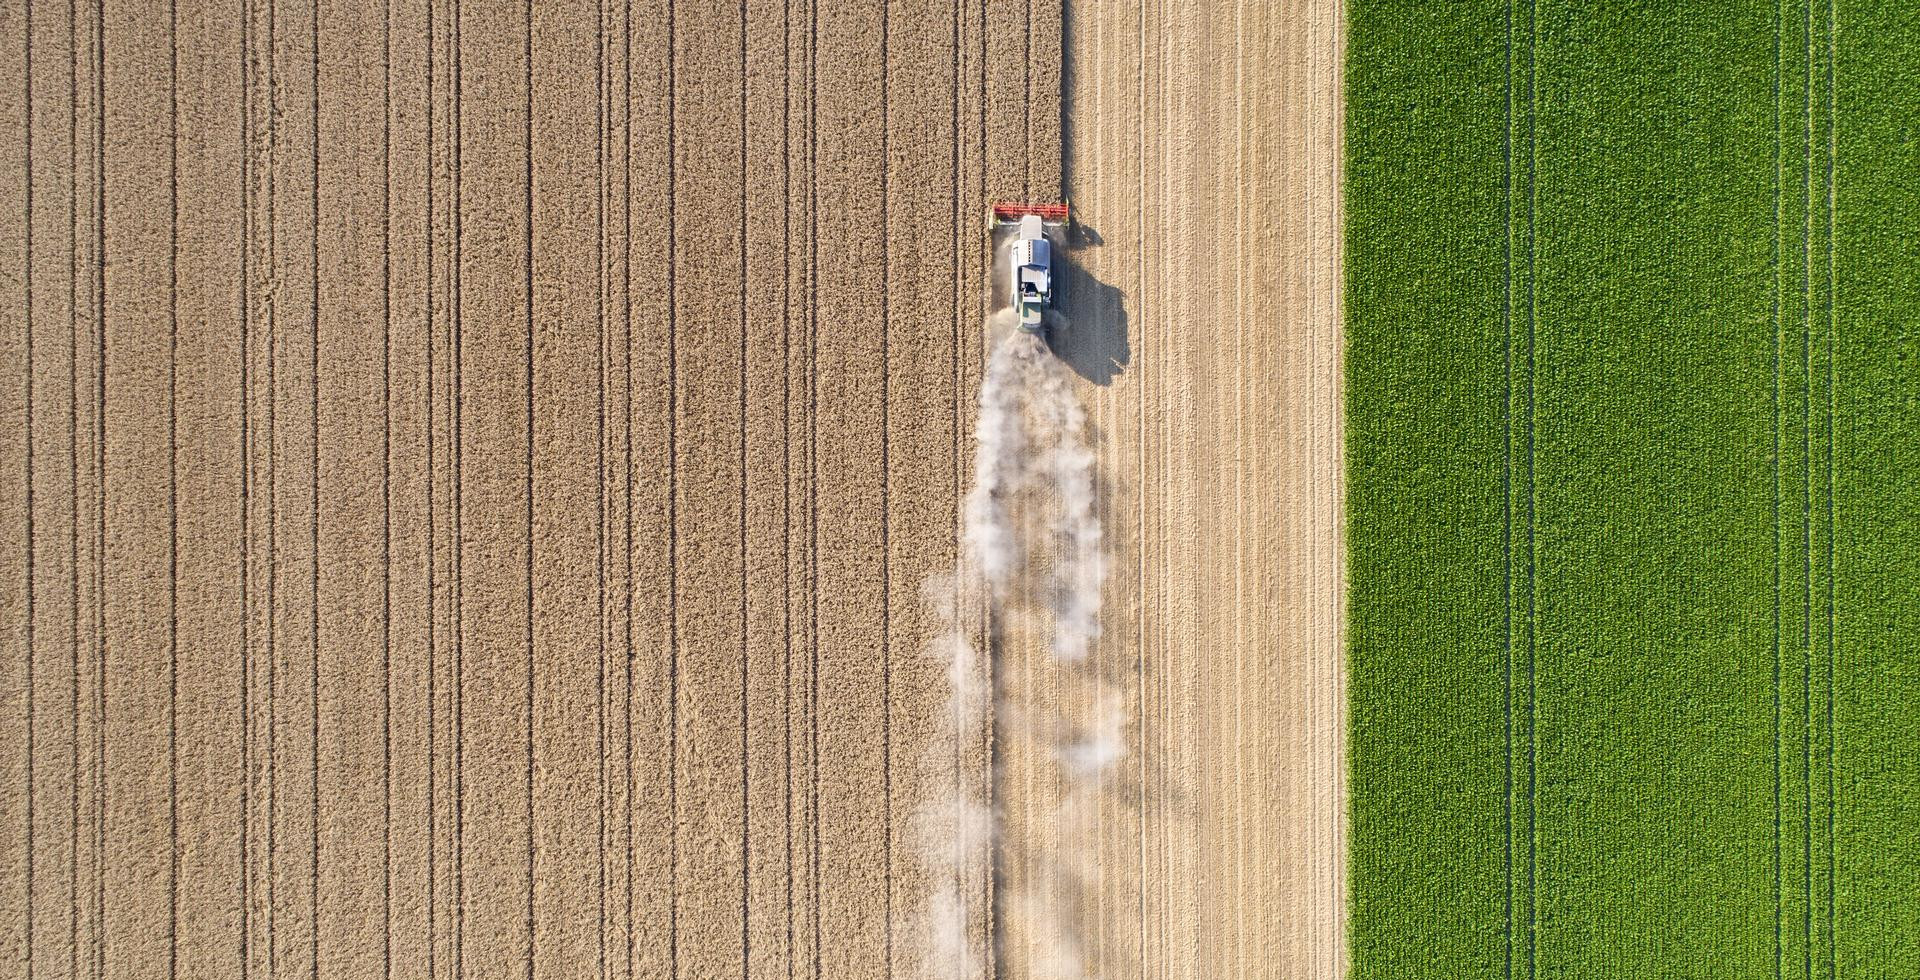 Tractor moving in a straight line across a field while spraying chemicals